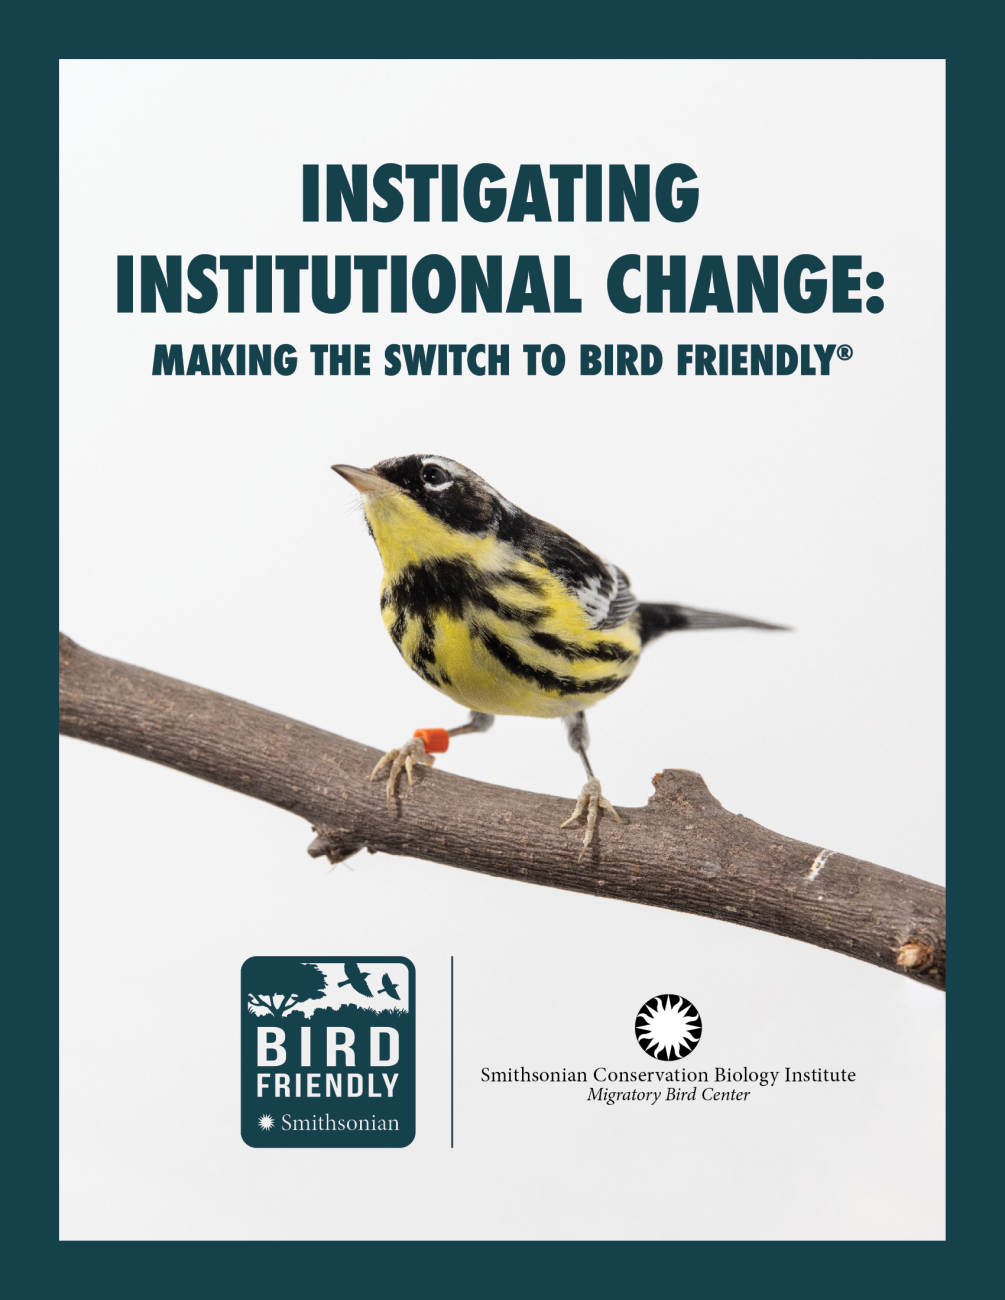 The first page of the "Instigating Institutional Change: Making the Switch to Bird Friendly" toolkit featuring a wood thrush bird perched on a branch, and the Bird Friendly and Smithsonian Conservation Biology Institute logos